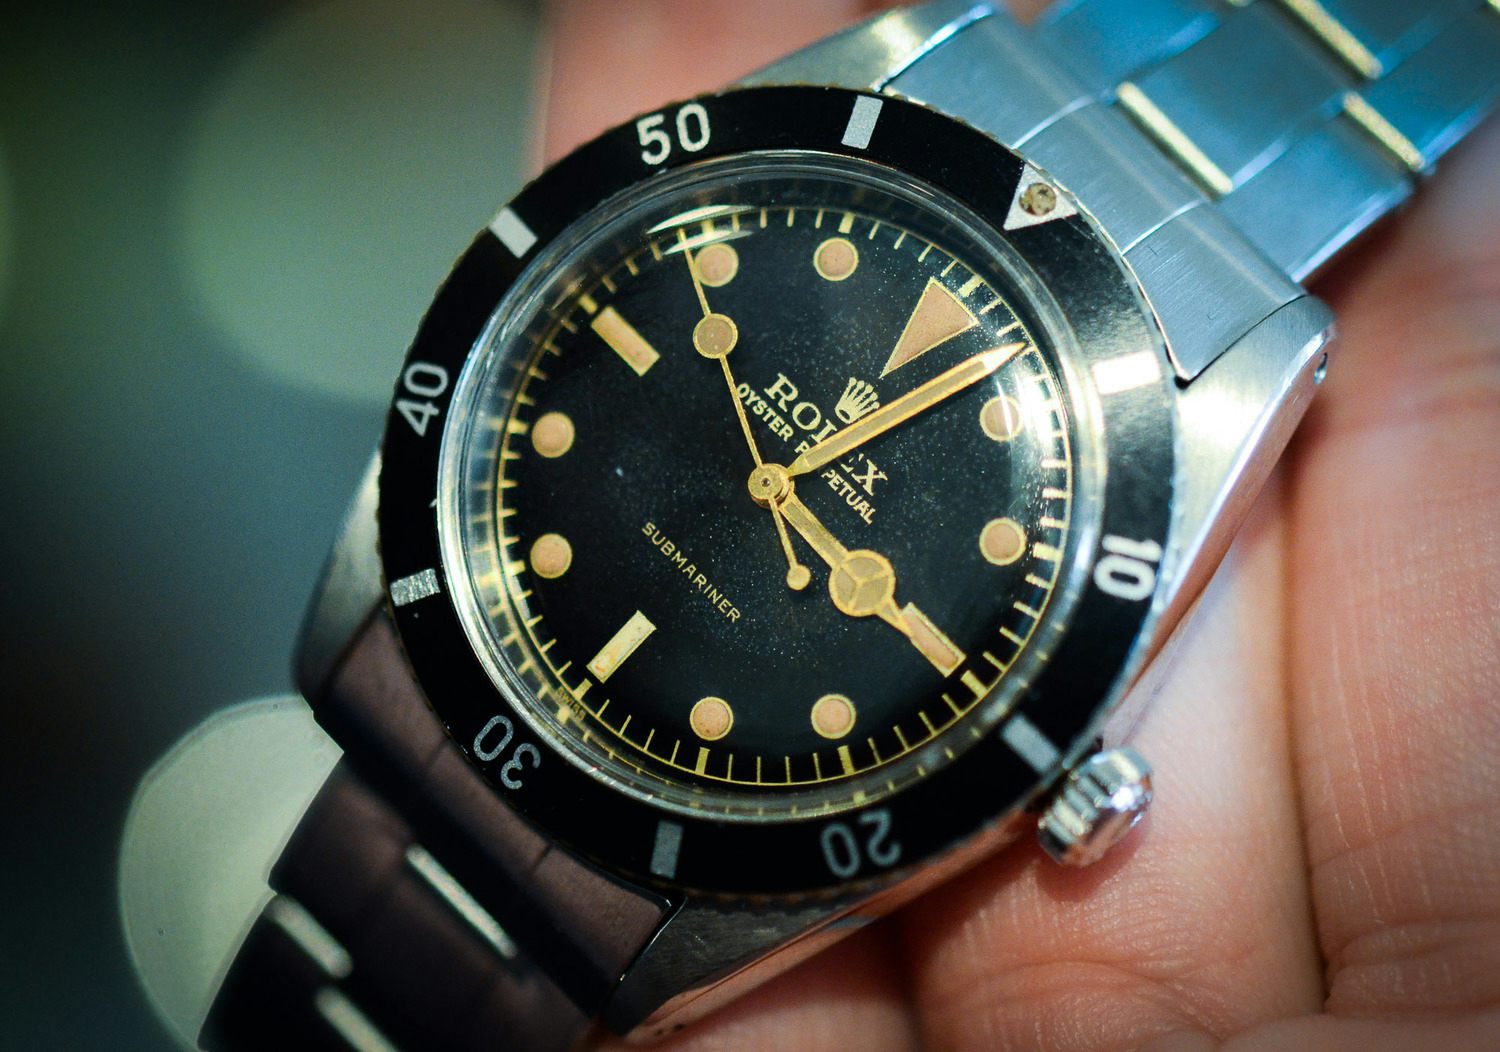 A Minute With A Super-Early Rolex Submariner, A Reference 6205 From 1954 - HODINKEE